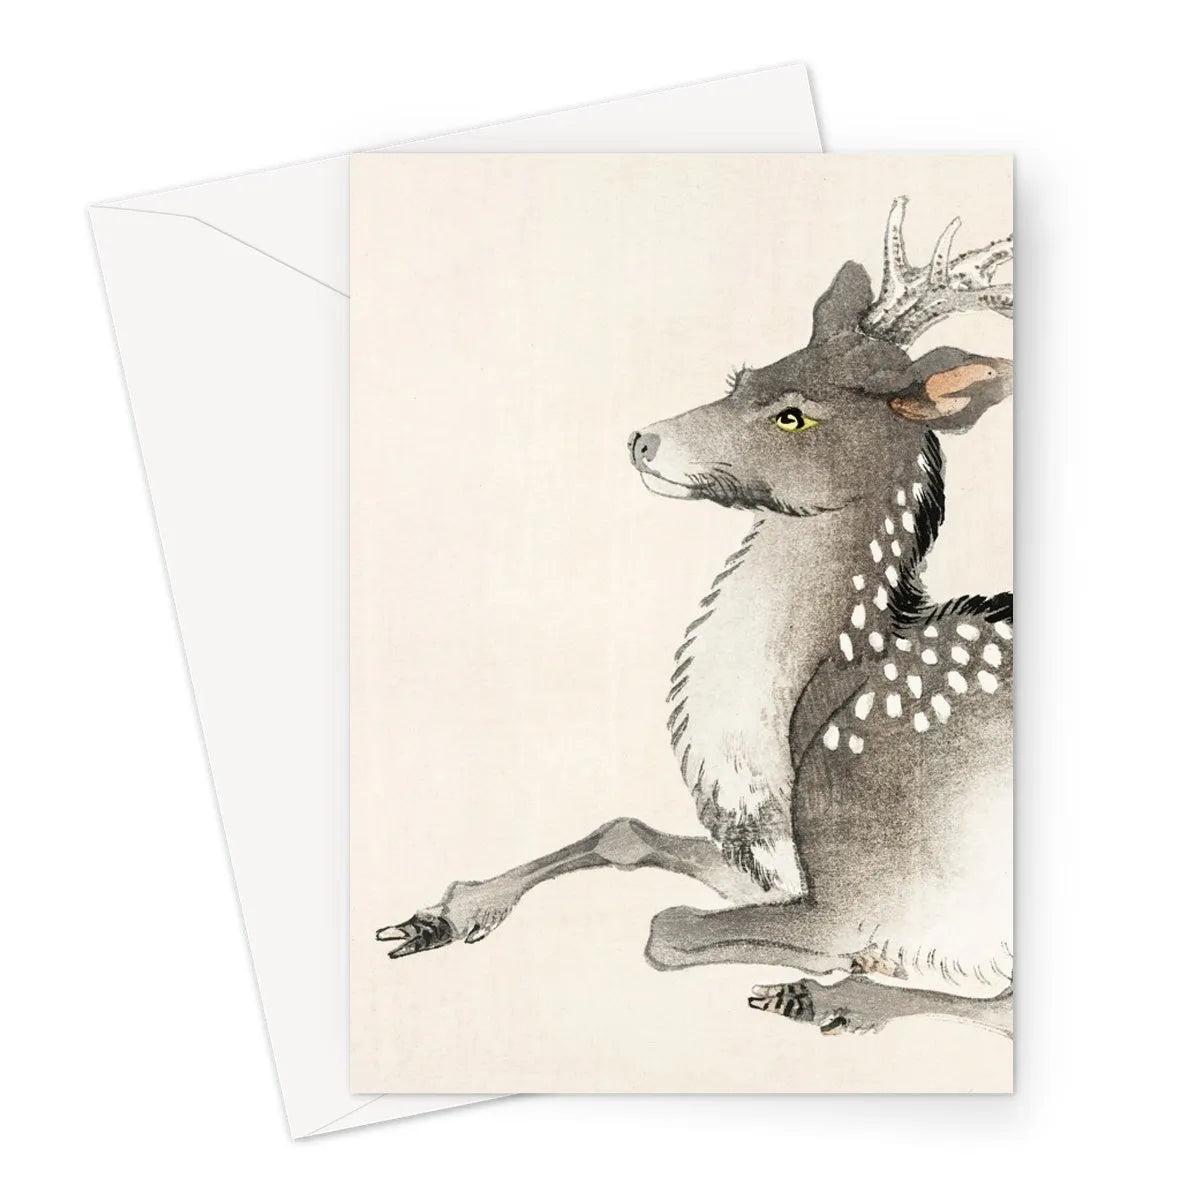 Elk By Kōno Bairei Greeting Card - A5 Portrait / 1 Card - Greeting & Note Cards - Aesthetic Art